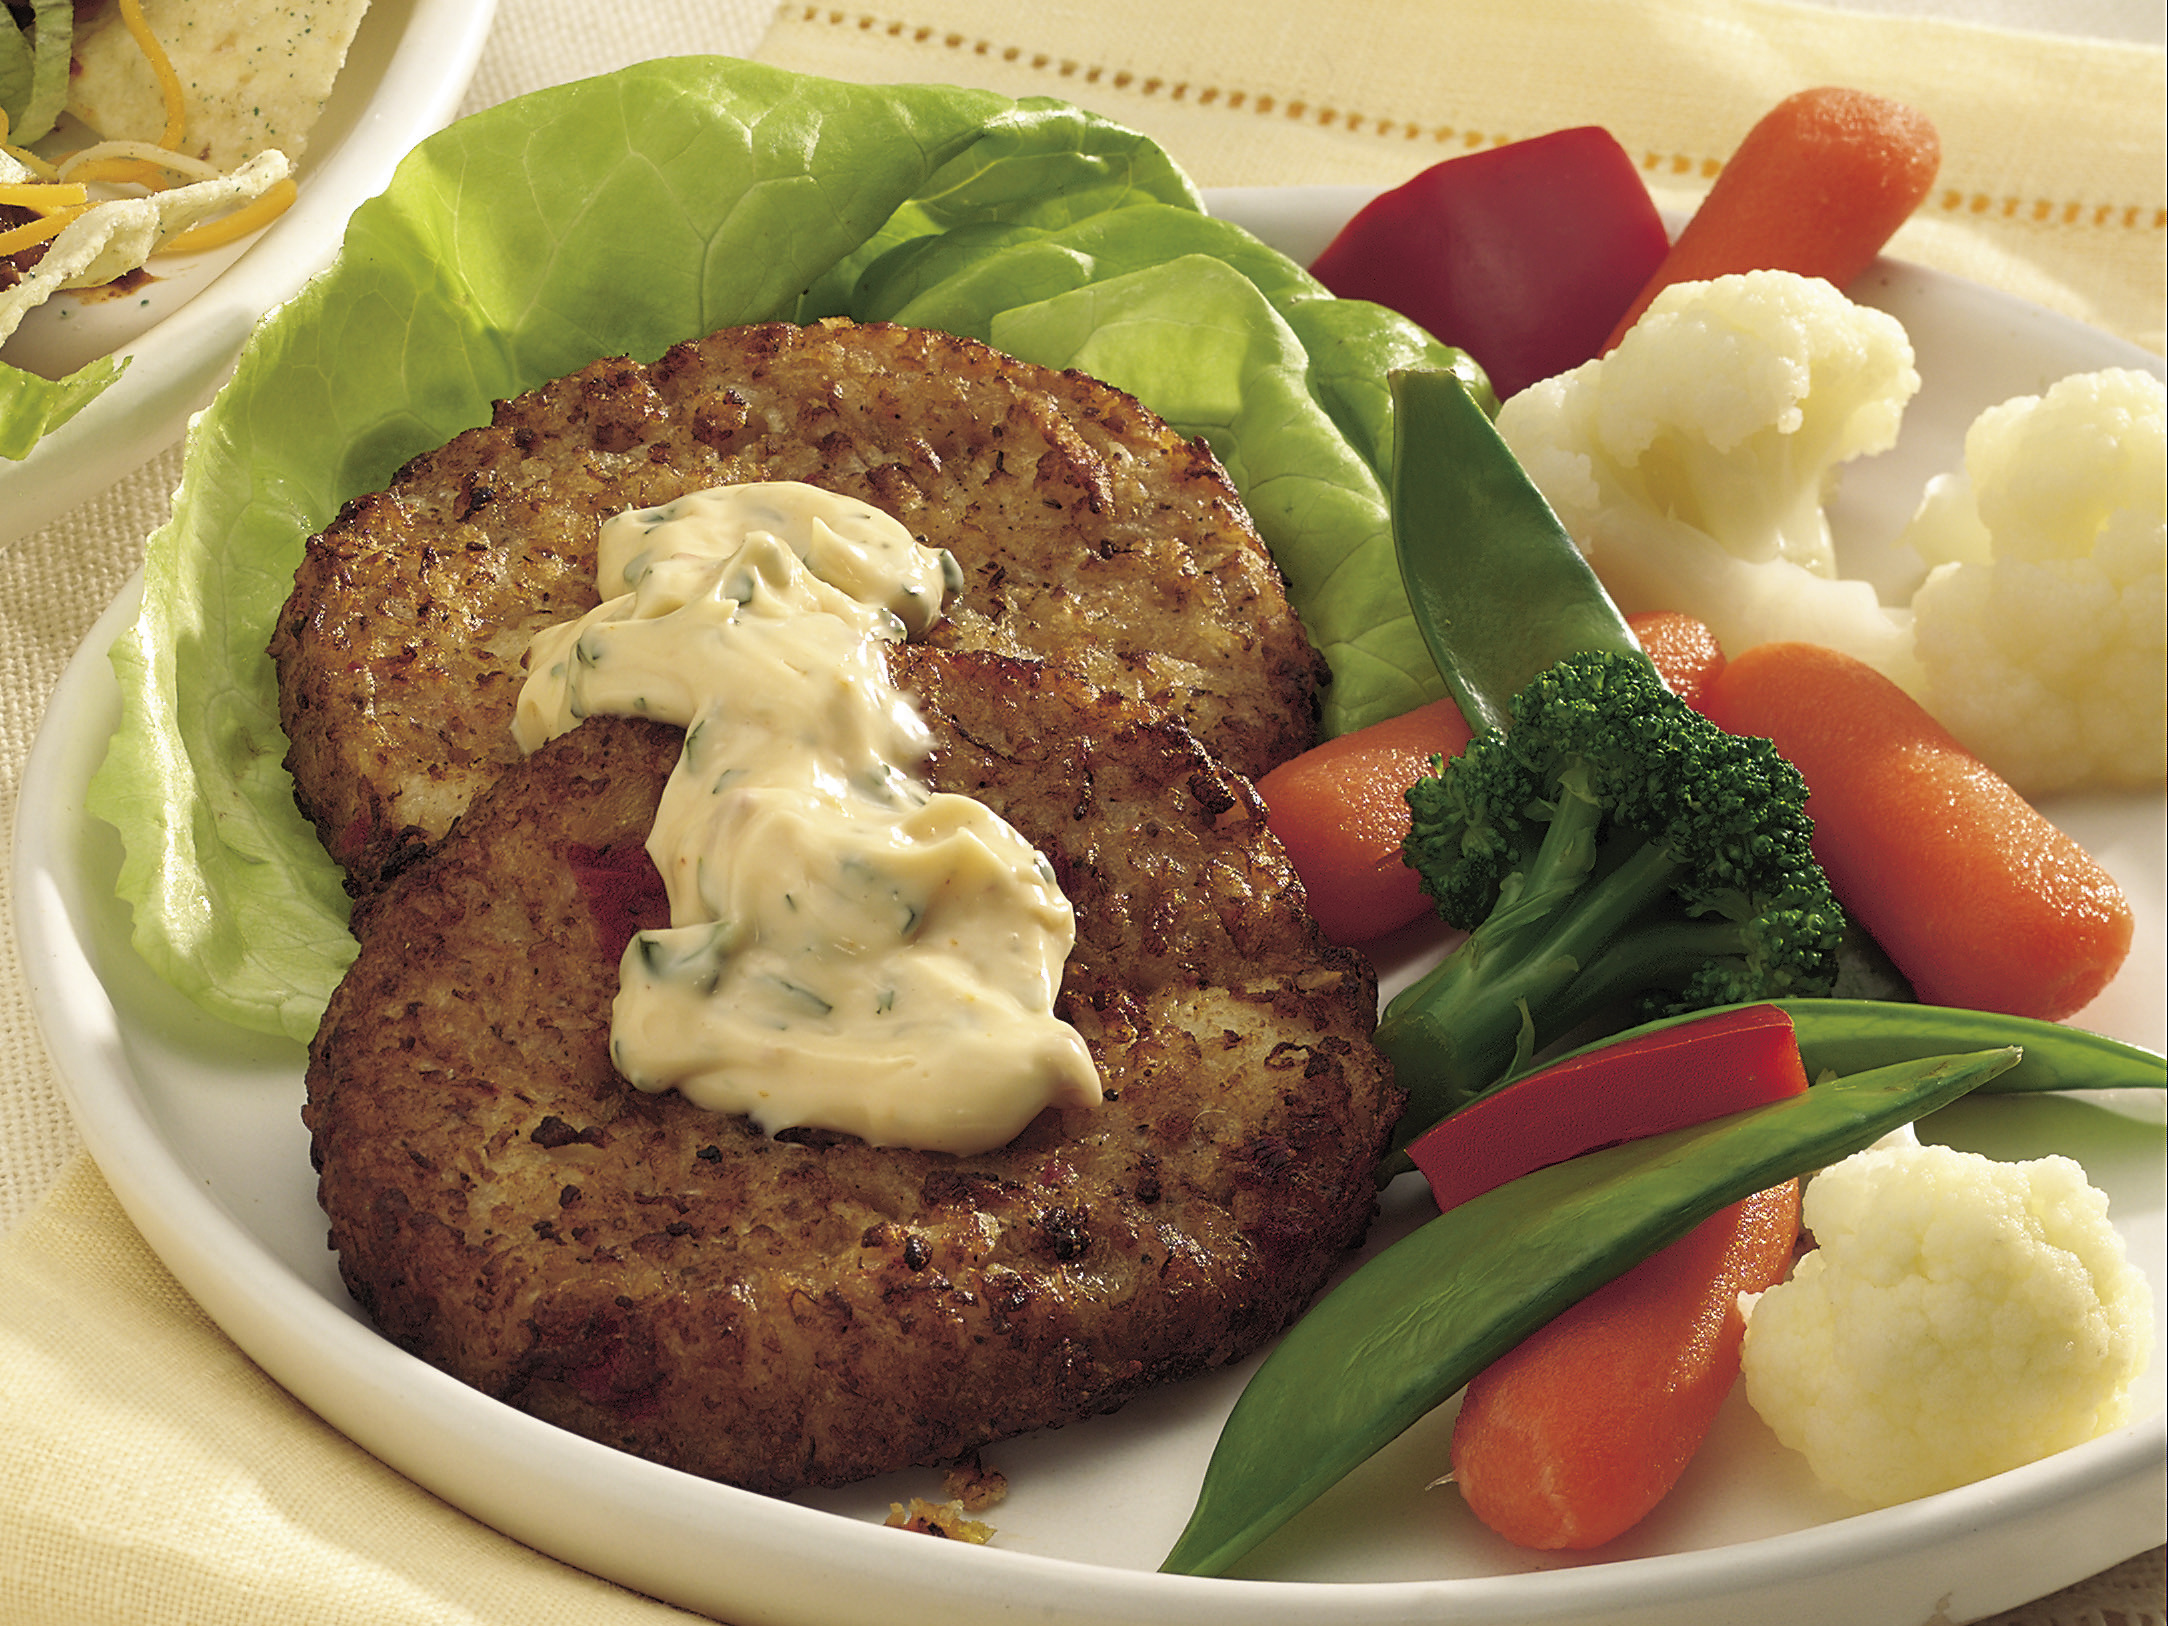 South Your Mouth: Grandma's Maryland-Style Crab Cakes